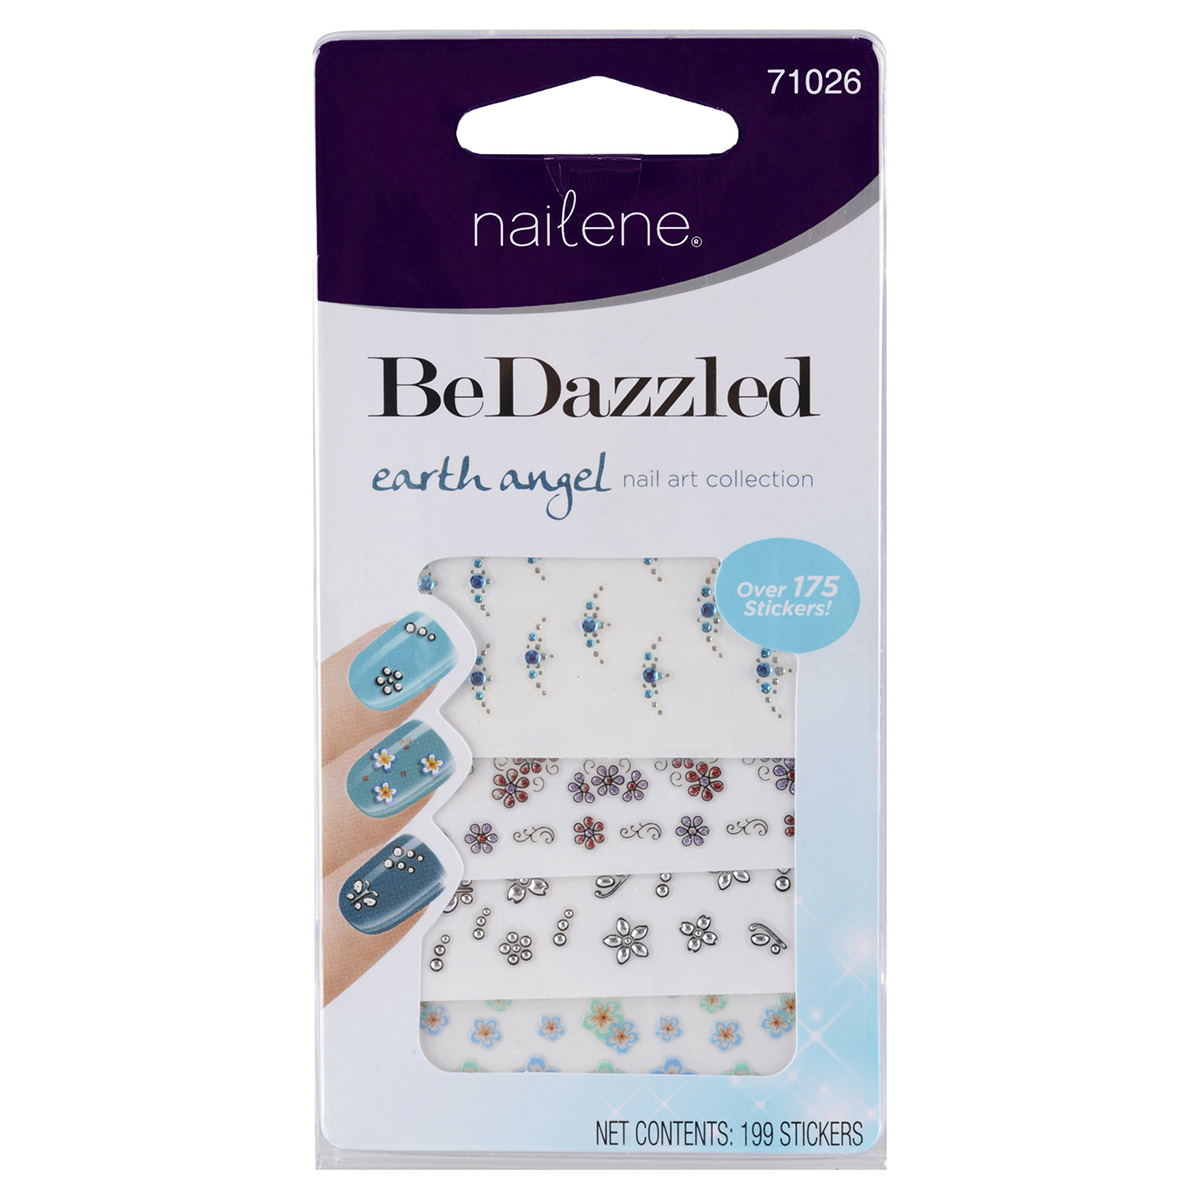 Nailene BeDazzled Earth Angel Nail Art Collection